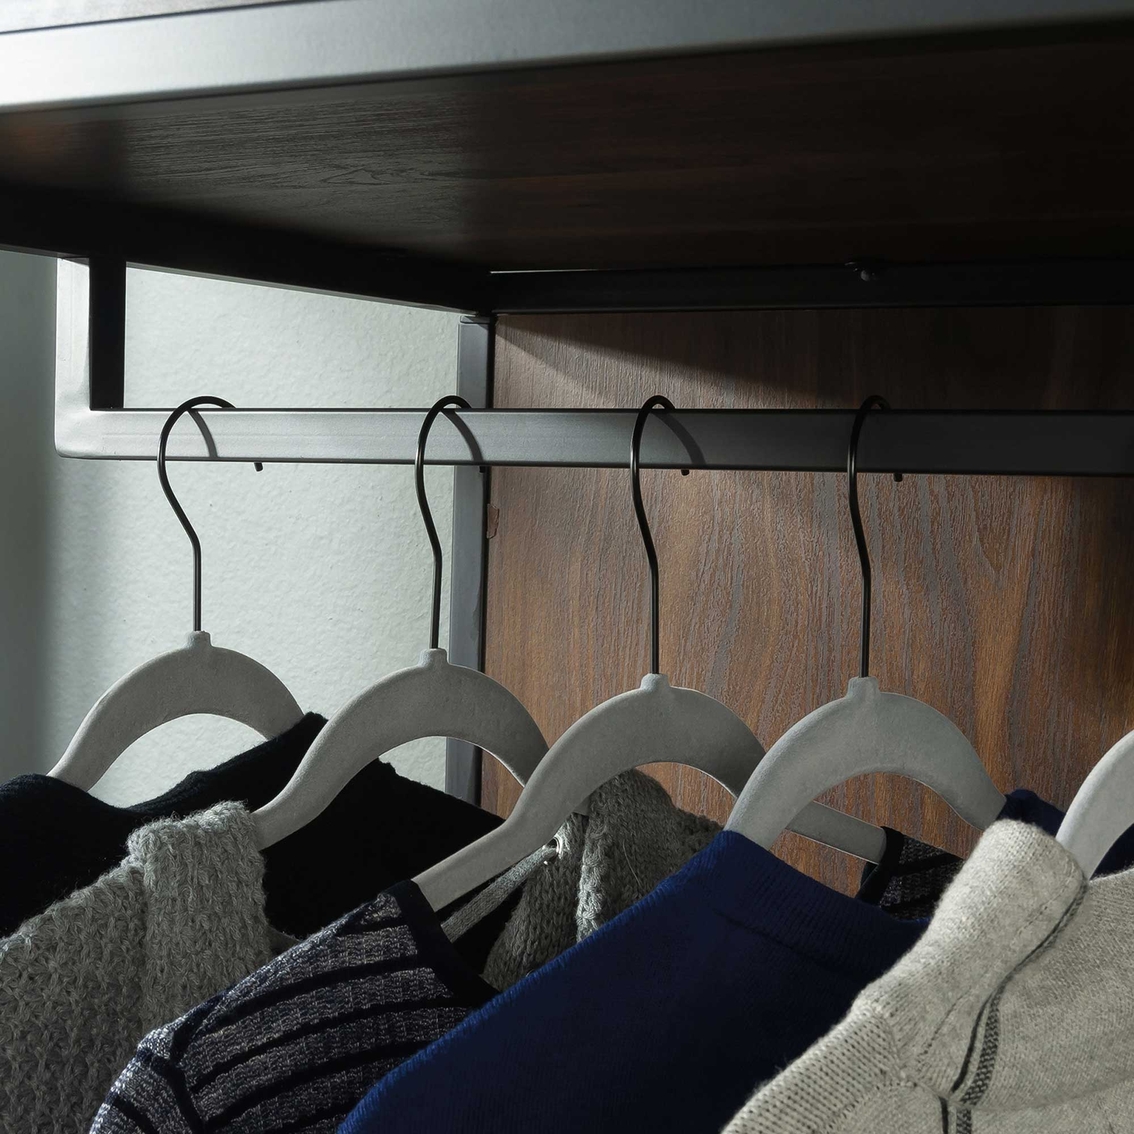 Sauder Open Wardrobe with Drawers in Grand Walnut - Image 6 of 8